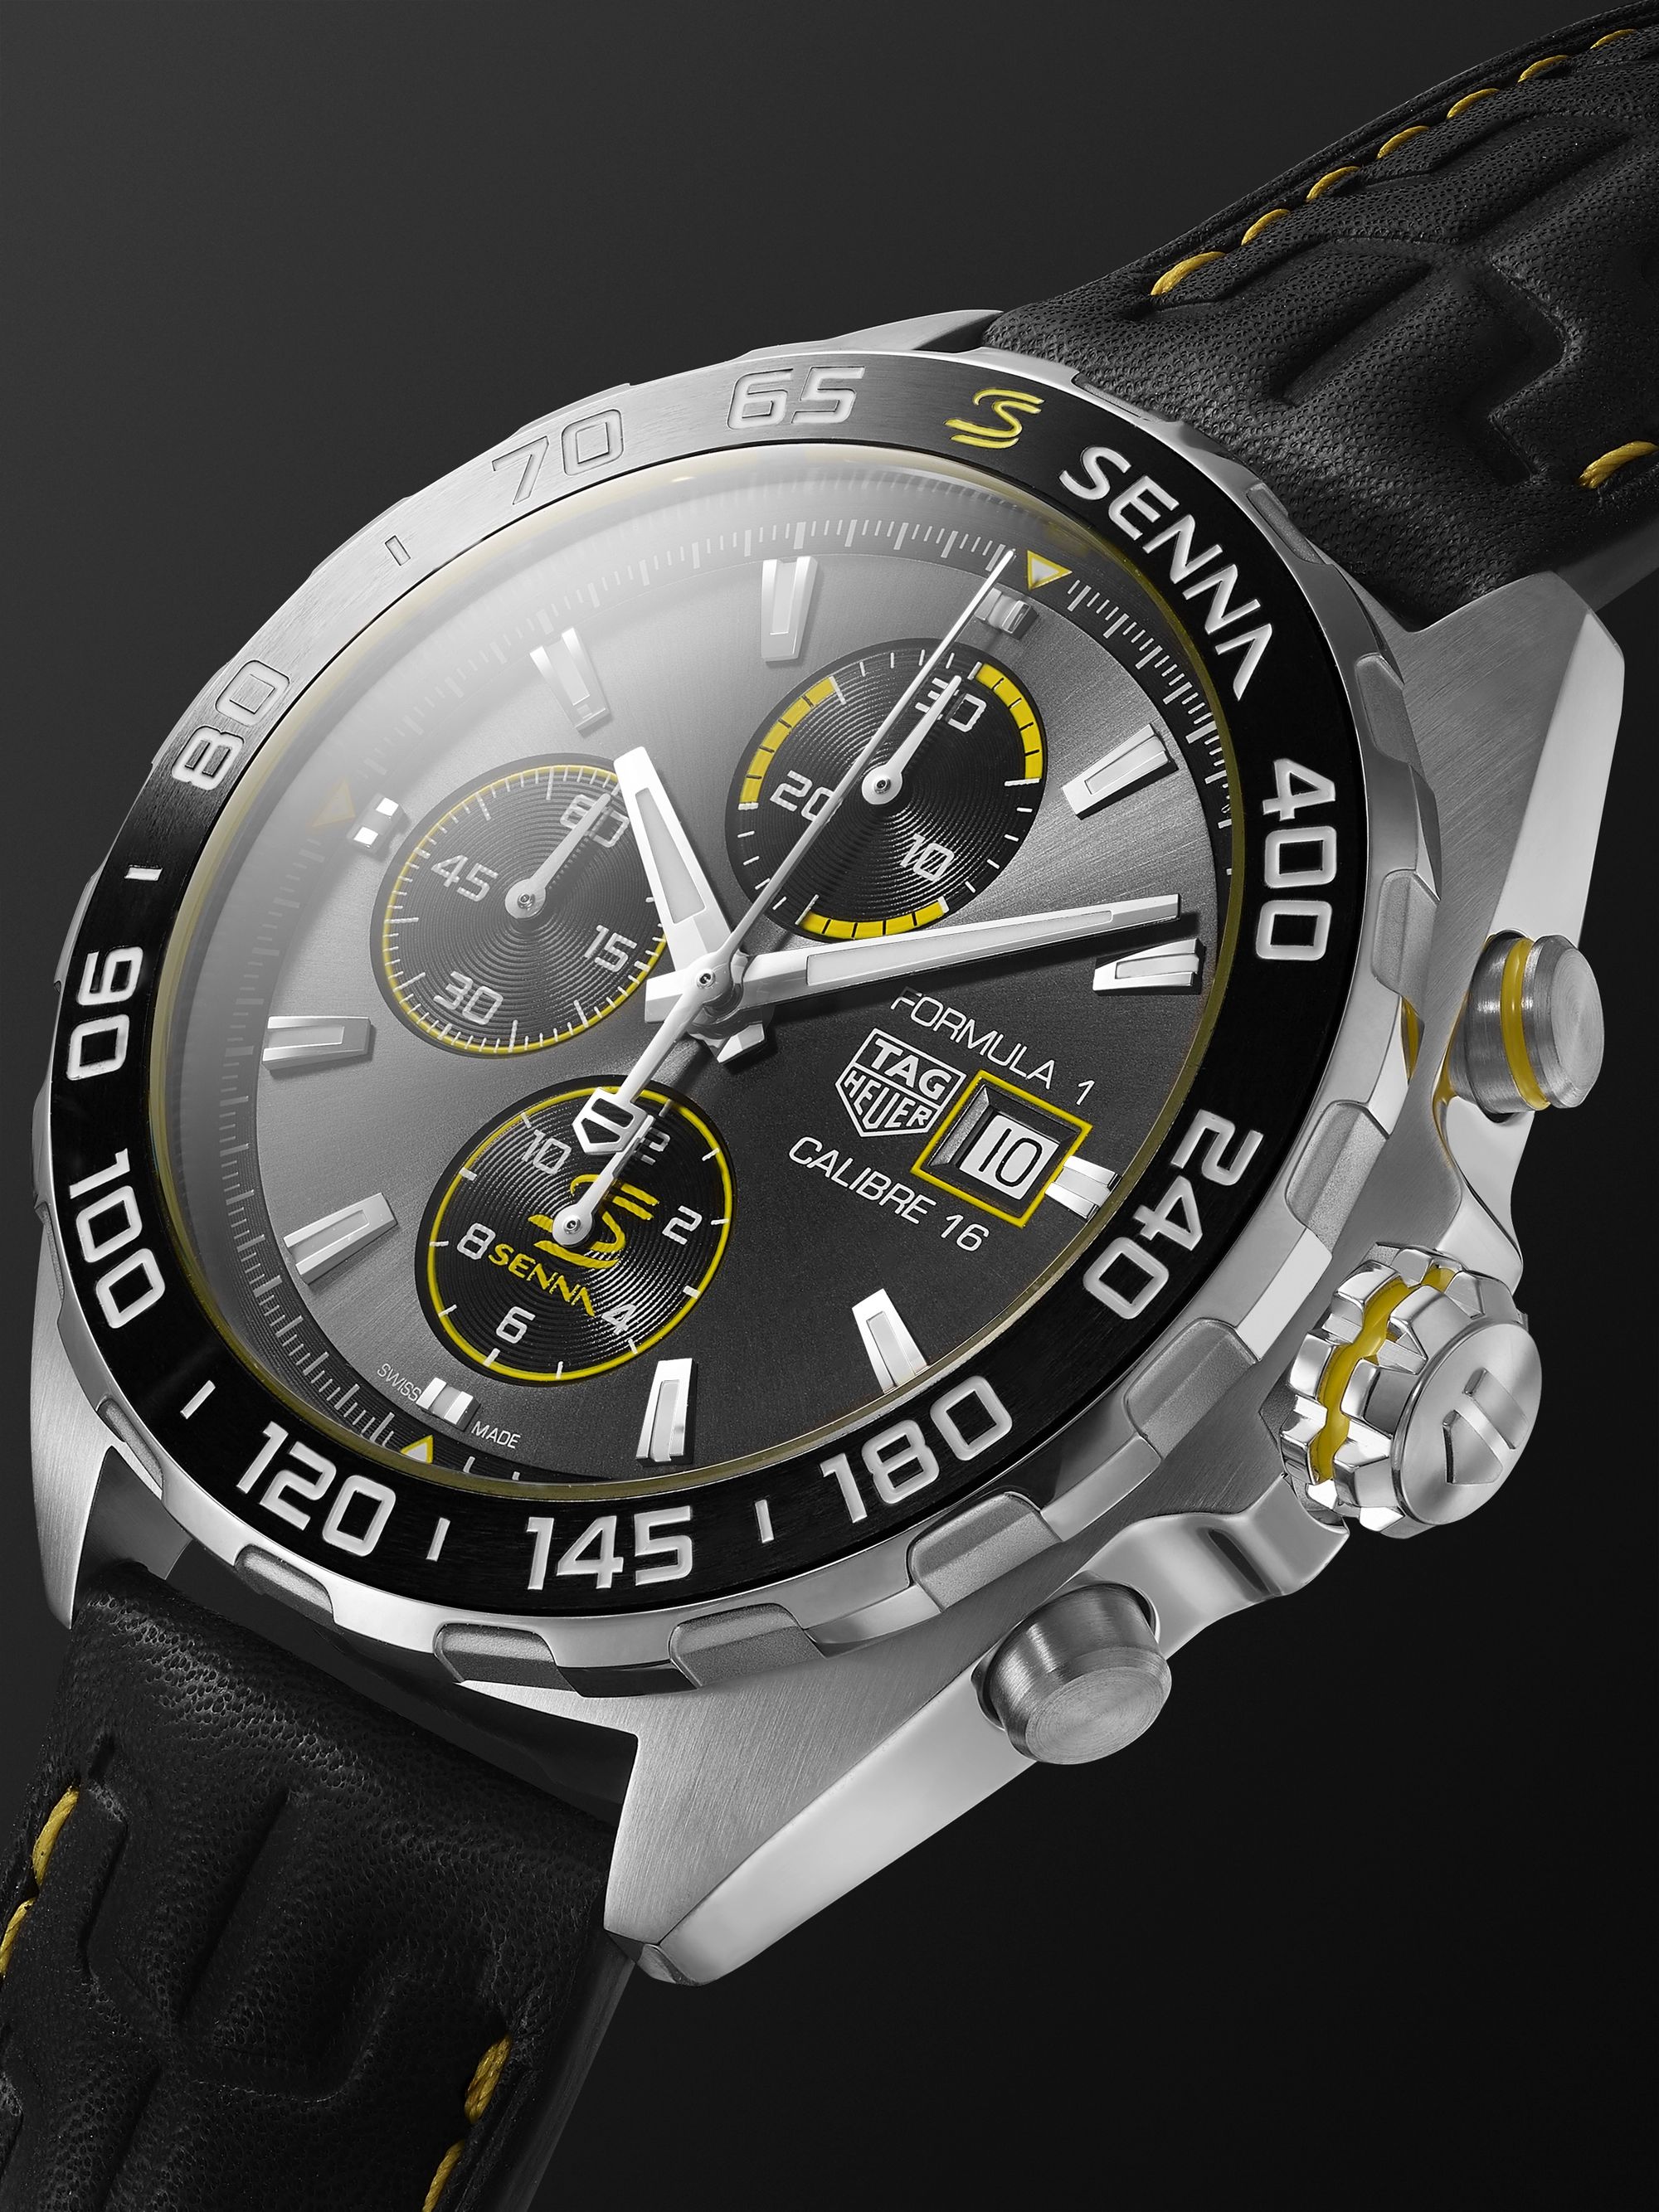 TAG Heuer Formula 1 x Senna Chronograph 44mm Stainless Steel and Leather Watch, Ref. No. CAZ201B.FC6487